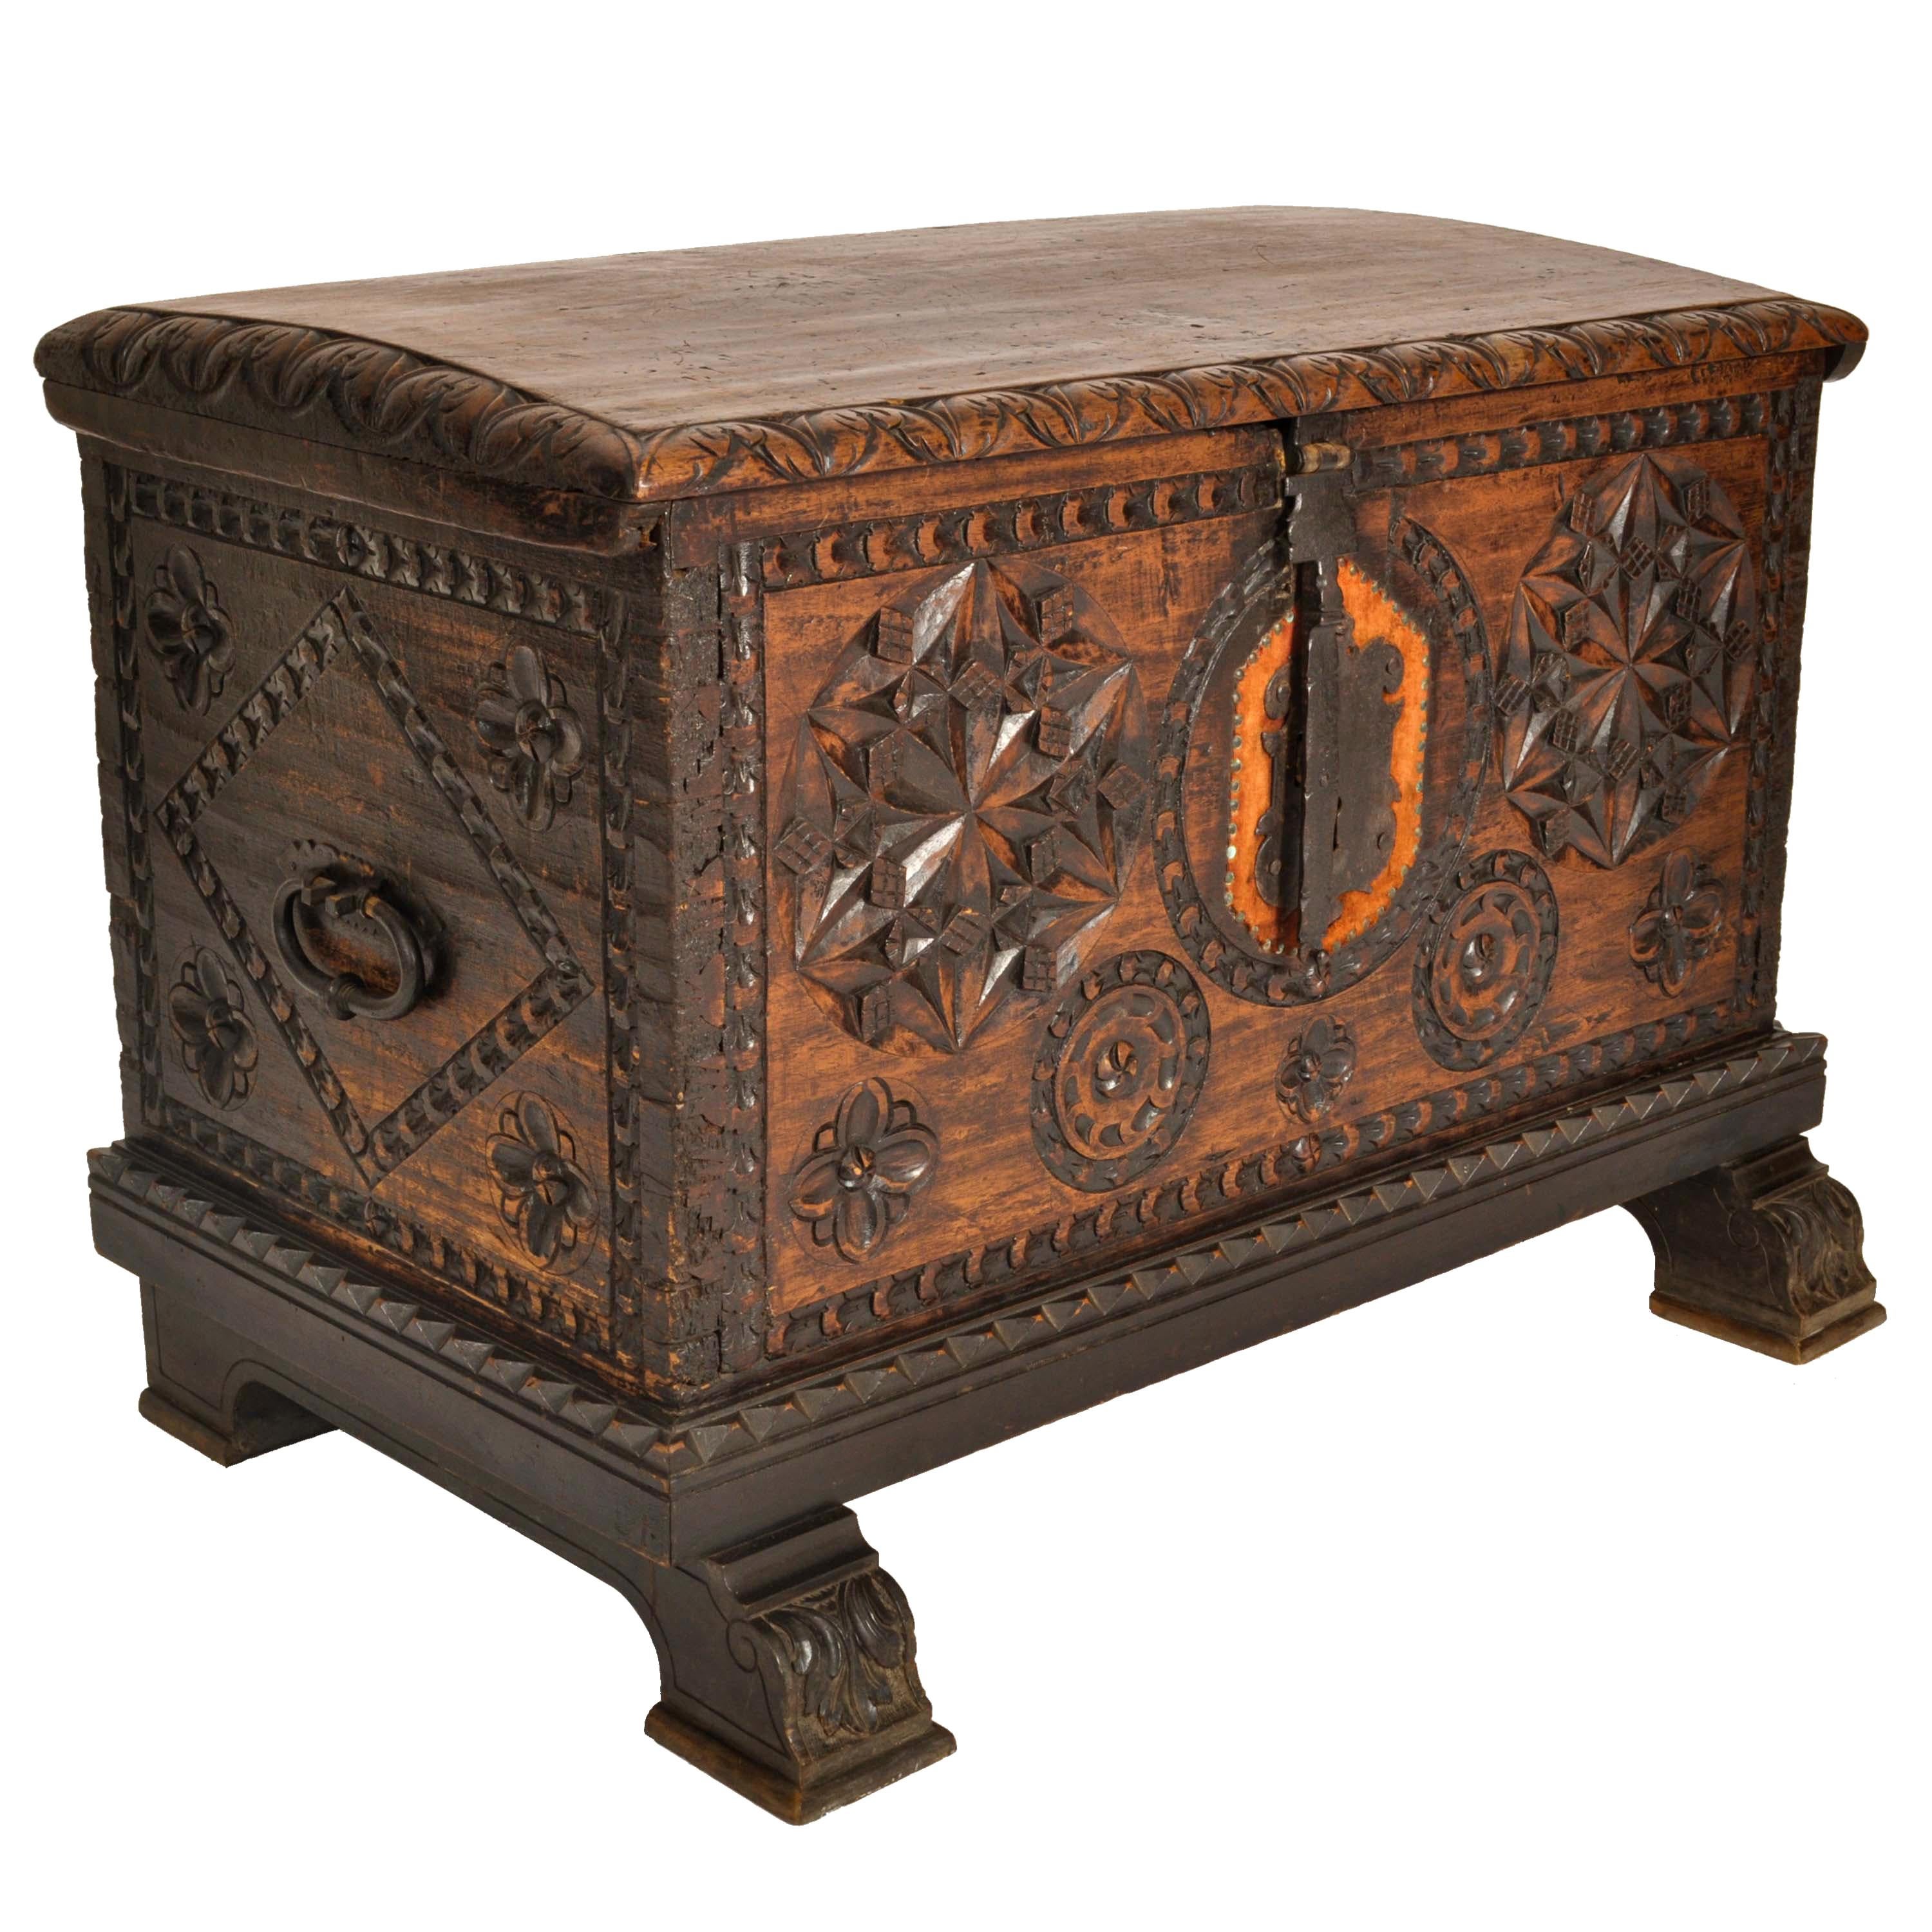 A very good antique Scandinavian carved Baroque Folk Art dowry chest, Circa 1780.
The chest having a gently domed top with a hinged lid having the original 'snipe' hinges, the edge of the lid having carved gadrooning. To the front of the chest